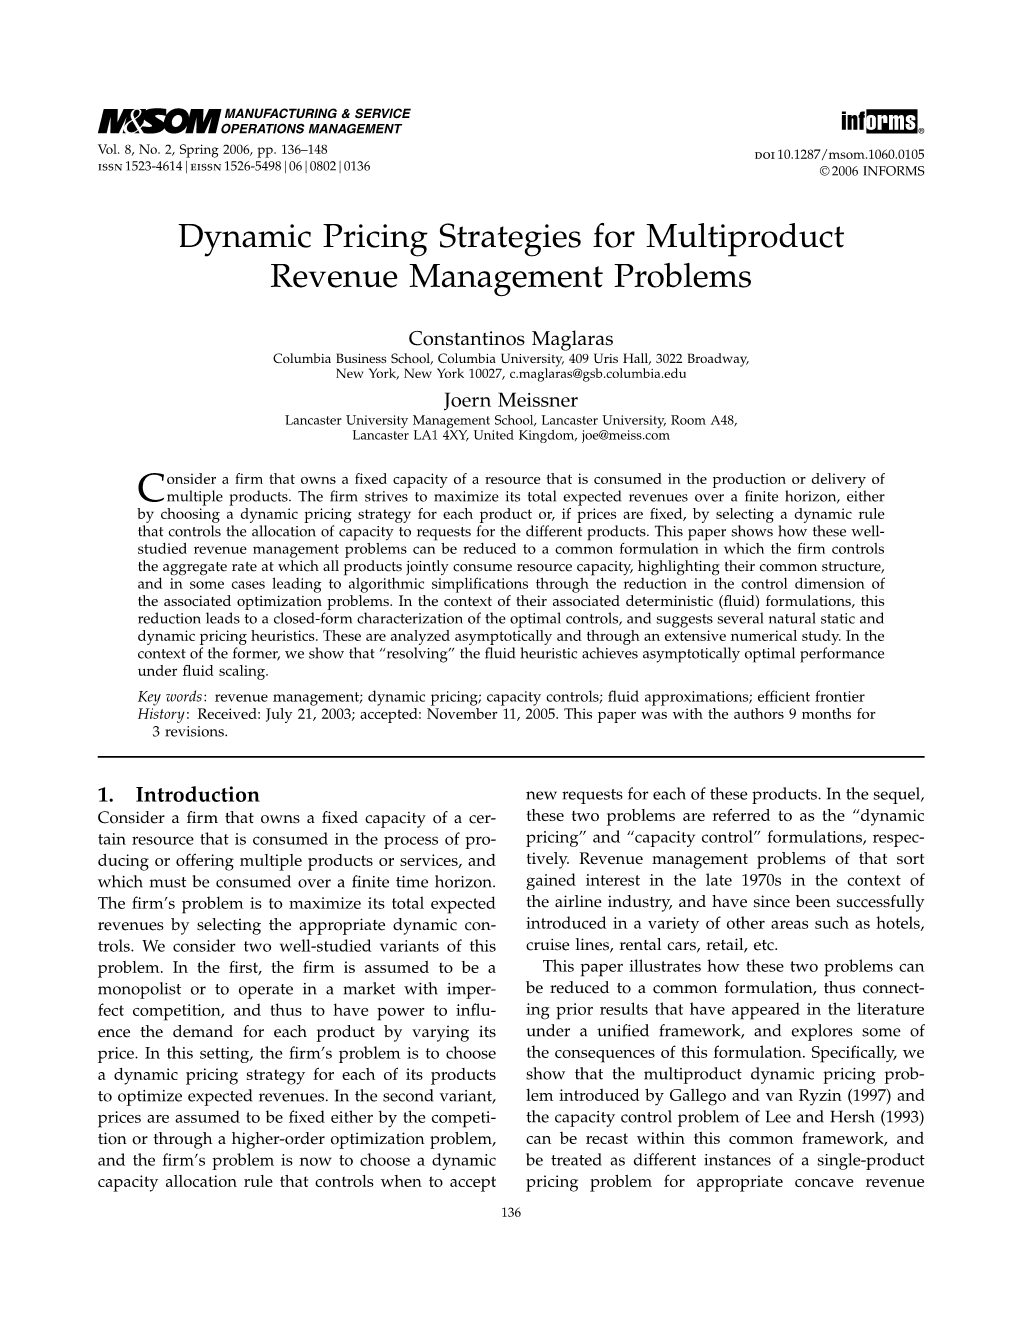 Dynamic Pricing Strategies for Multi-Product Revenue Management